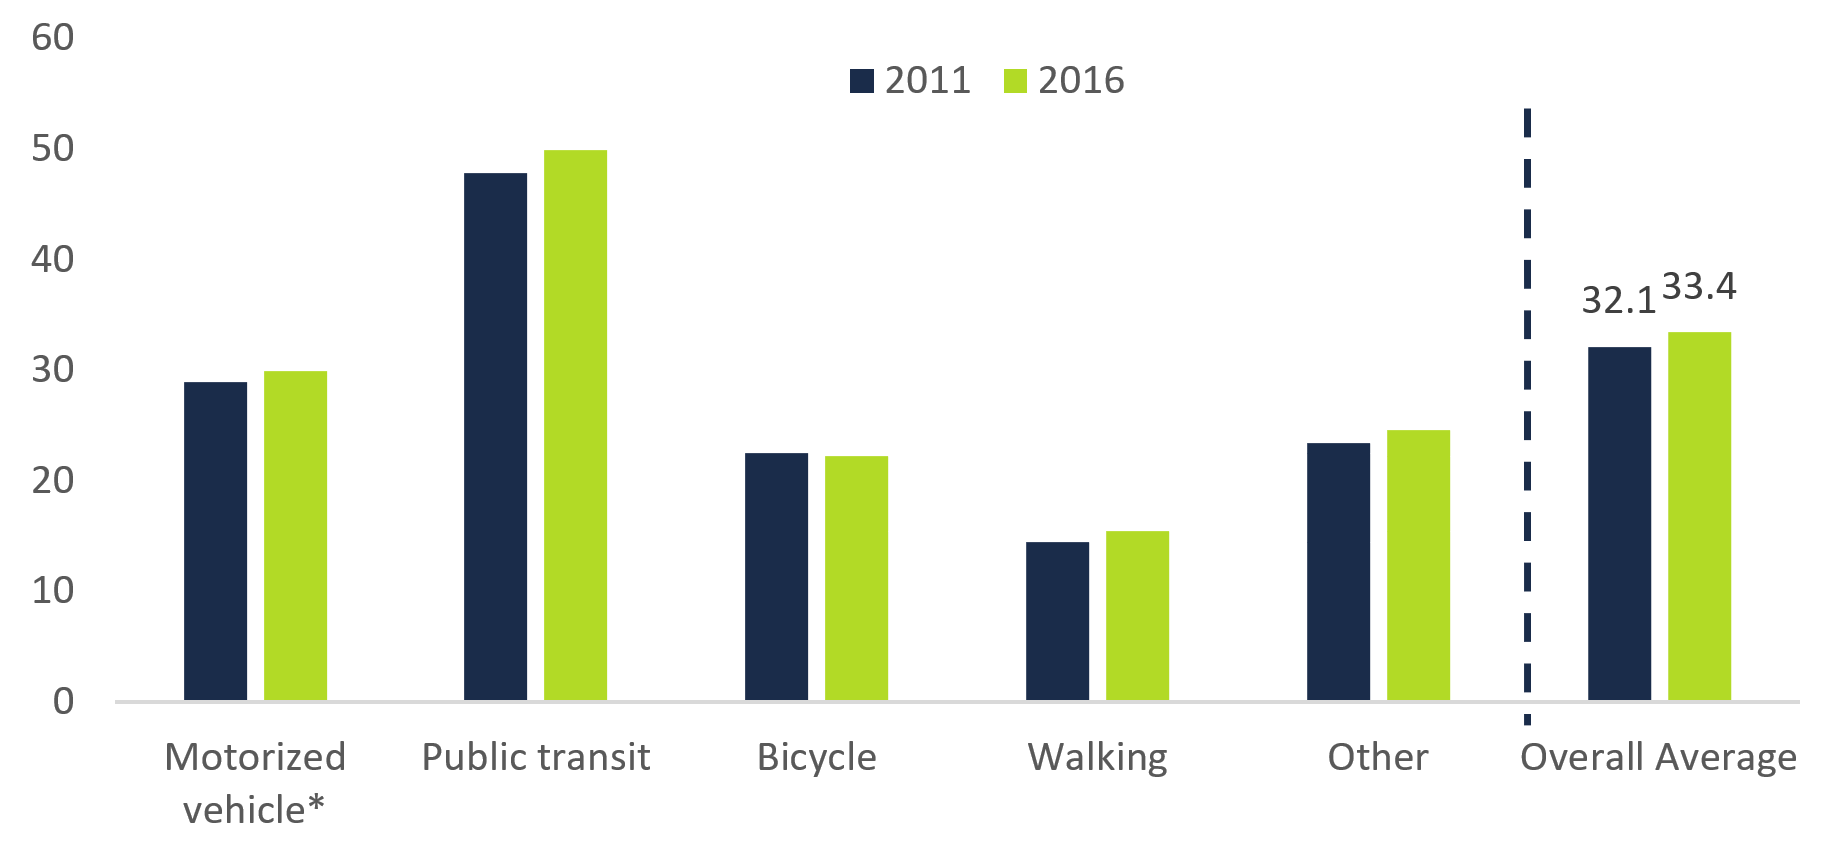 This chart shows the average commute times to work by mode of transportation in the GTHA cites in 2011 and 2016 in minutes. The chart shows that, in 2011, the average commute time to work via motorized vehicle was 28.9 minutes, 47.8 minutes for public transit, 22.5 minutes for bicycles, 14.5 for walking and 23.4 minutes for other modes of transportation. The chart shows that, in 2016, the average commute time to work via motorized vehicle was 29.9 minutes, 49.9 minutes for public transit, 22.2 minutes for bicycles, 15.4 minutes for walking and 24.5 minutes for other modes of transportation. The chart highlights that the average commute time to work across all modes of transportation in the GTHA cites was 32.1 minutes in 2011 and 33.4 minutes in 2016.